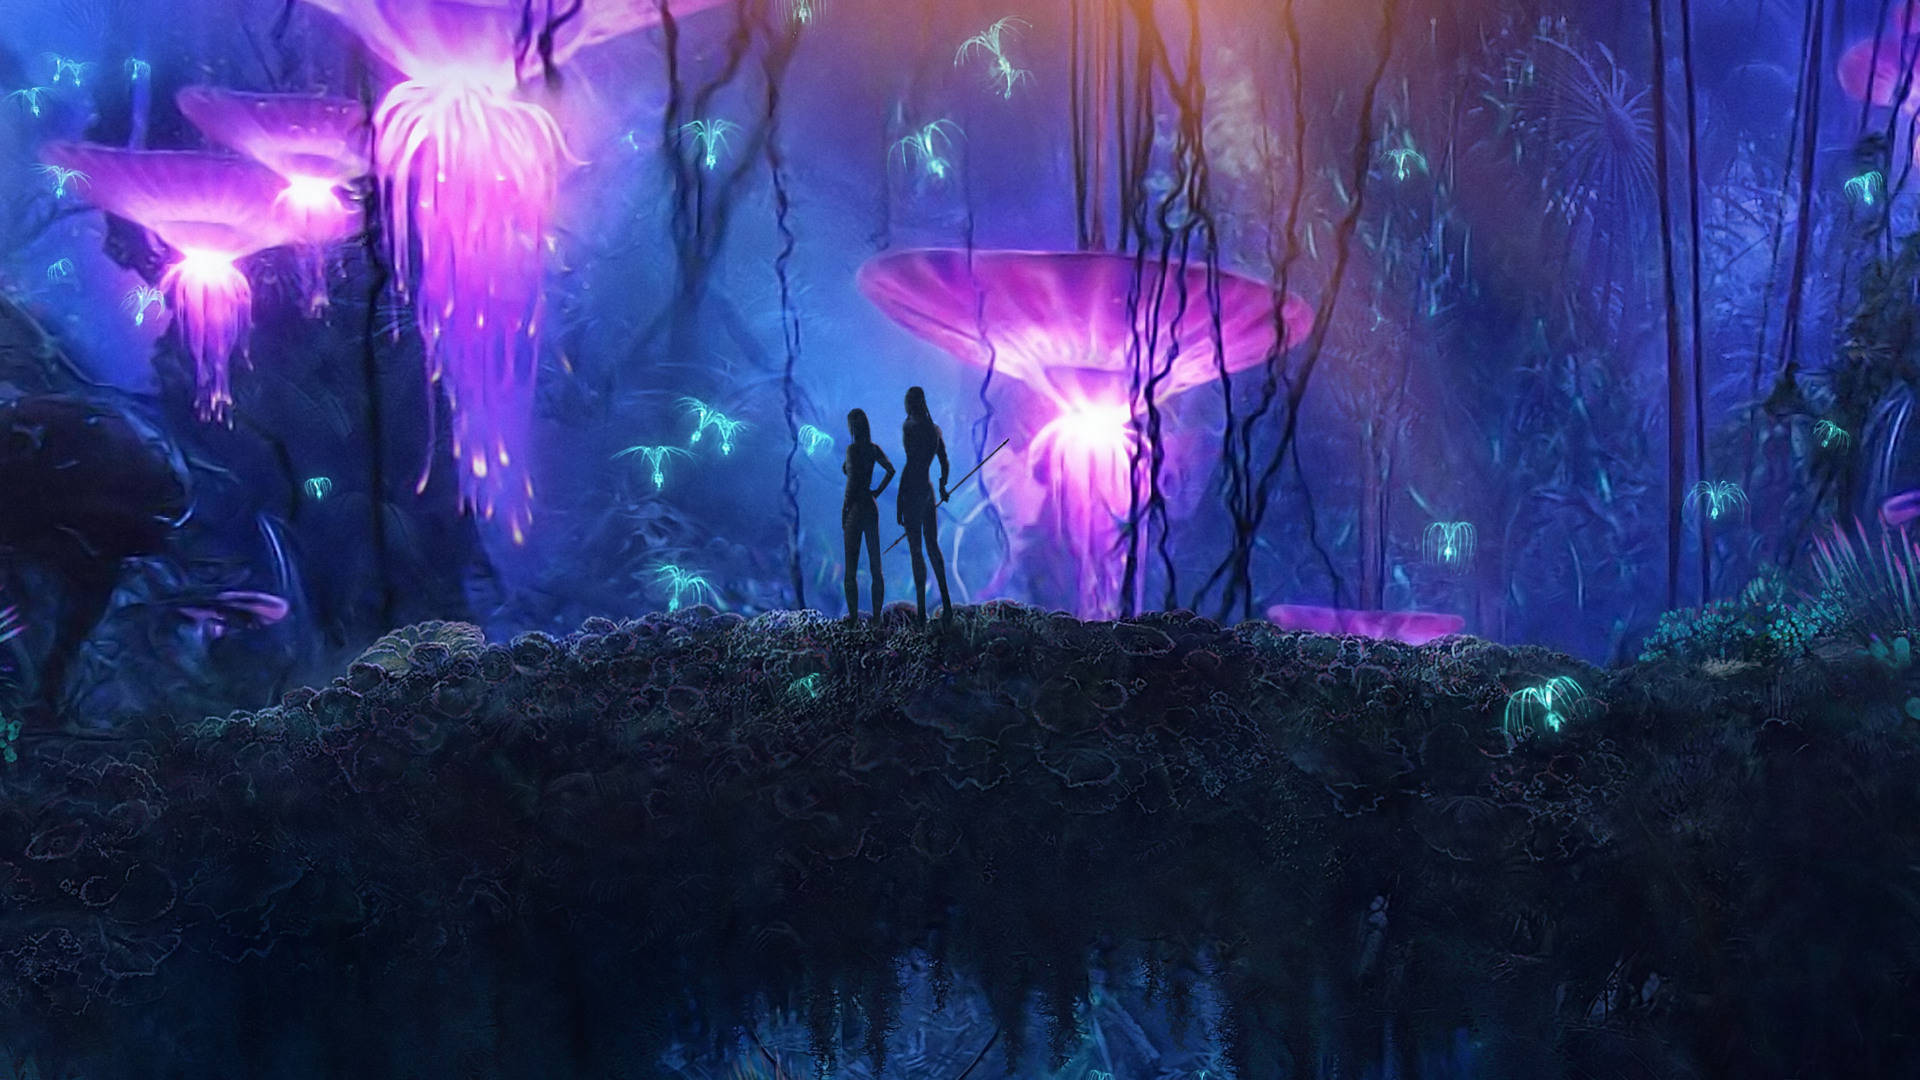 Magic Avatar Forest In Hd Background